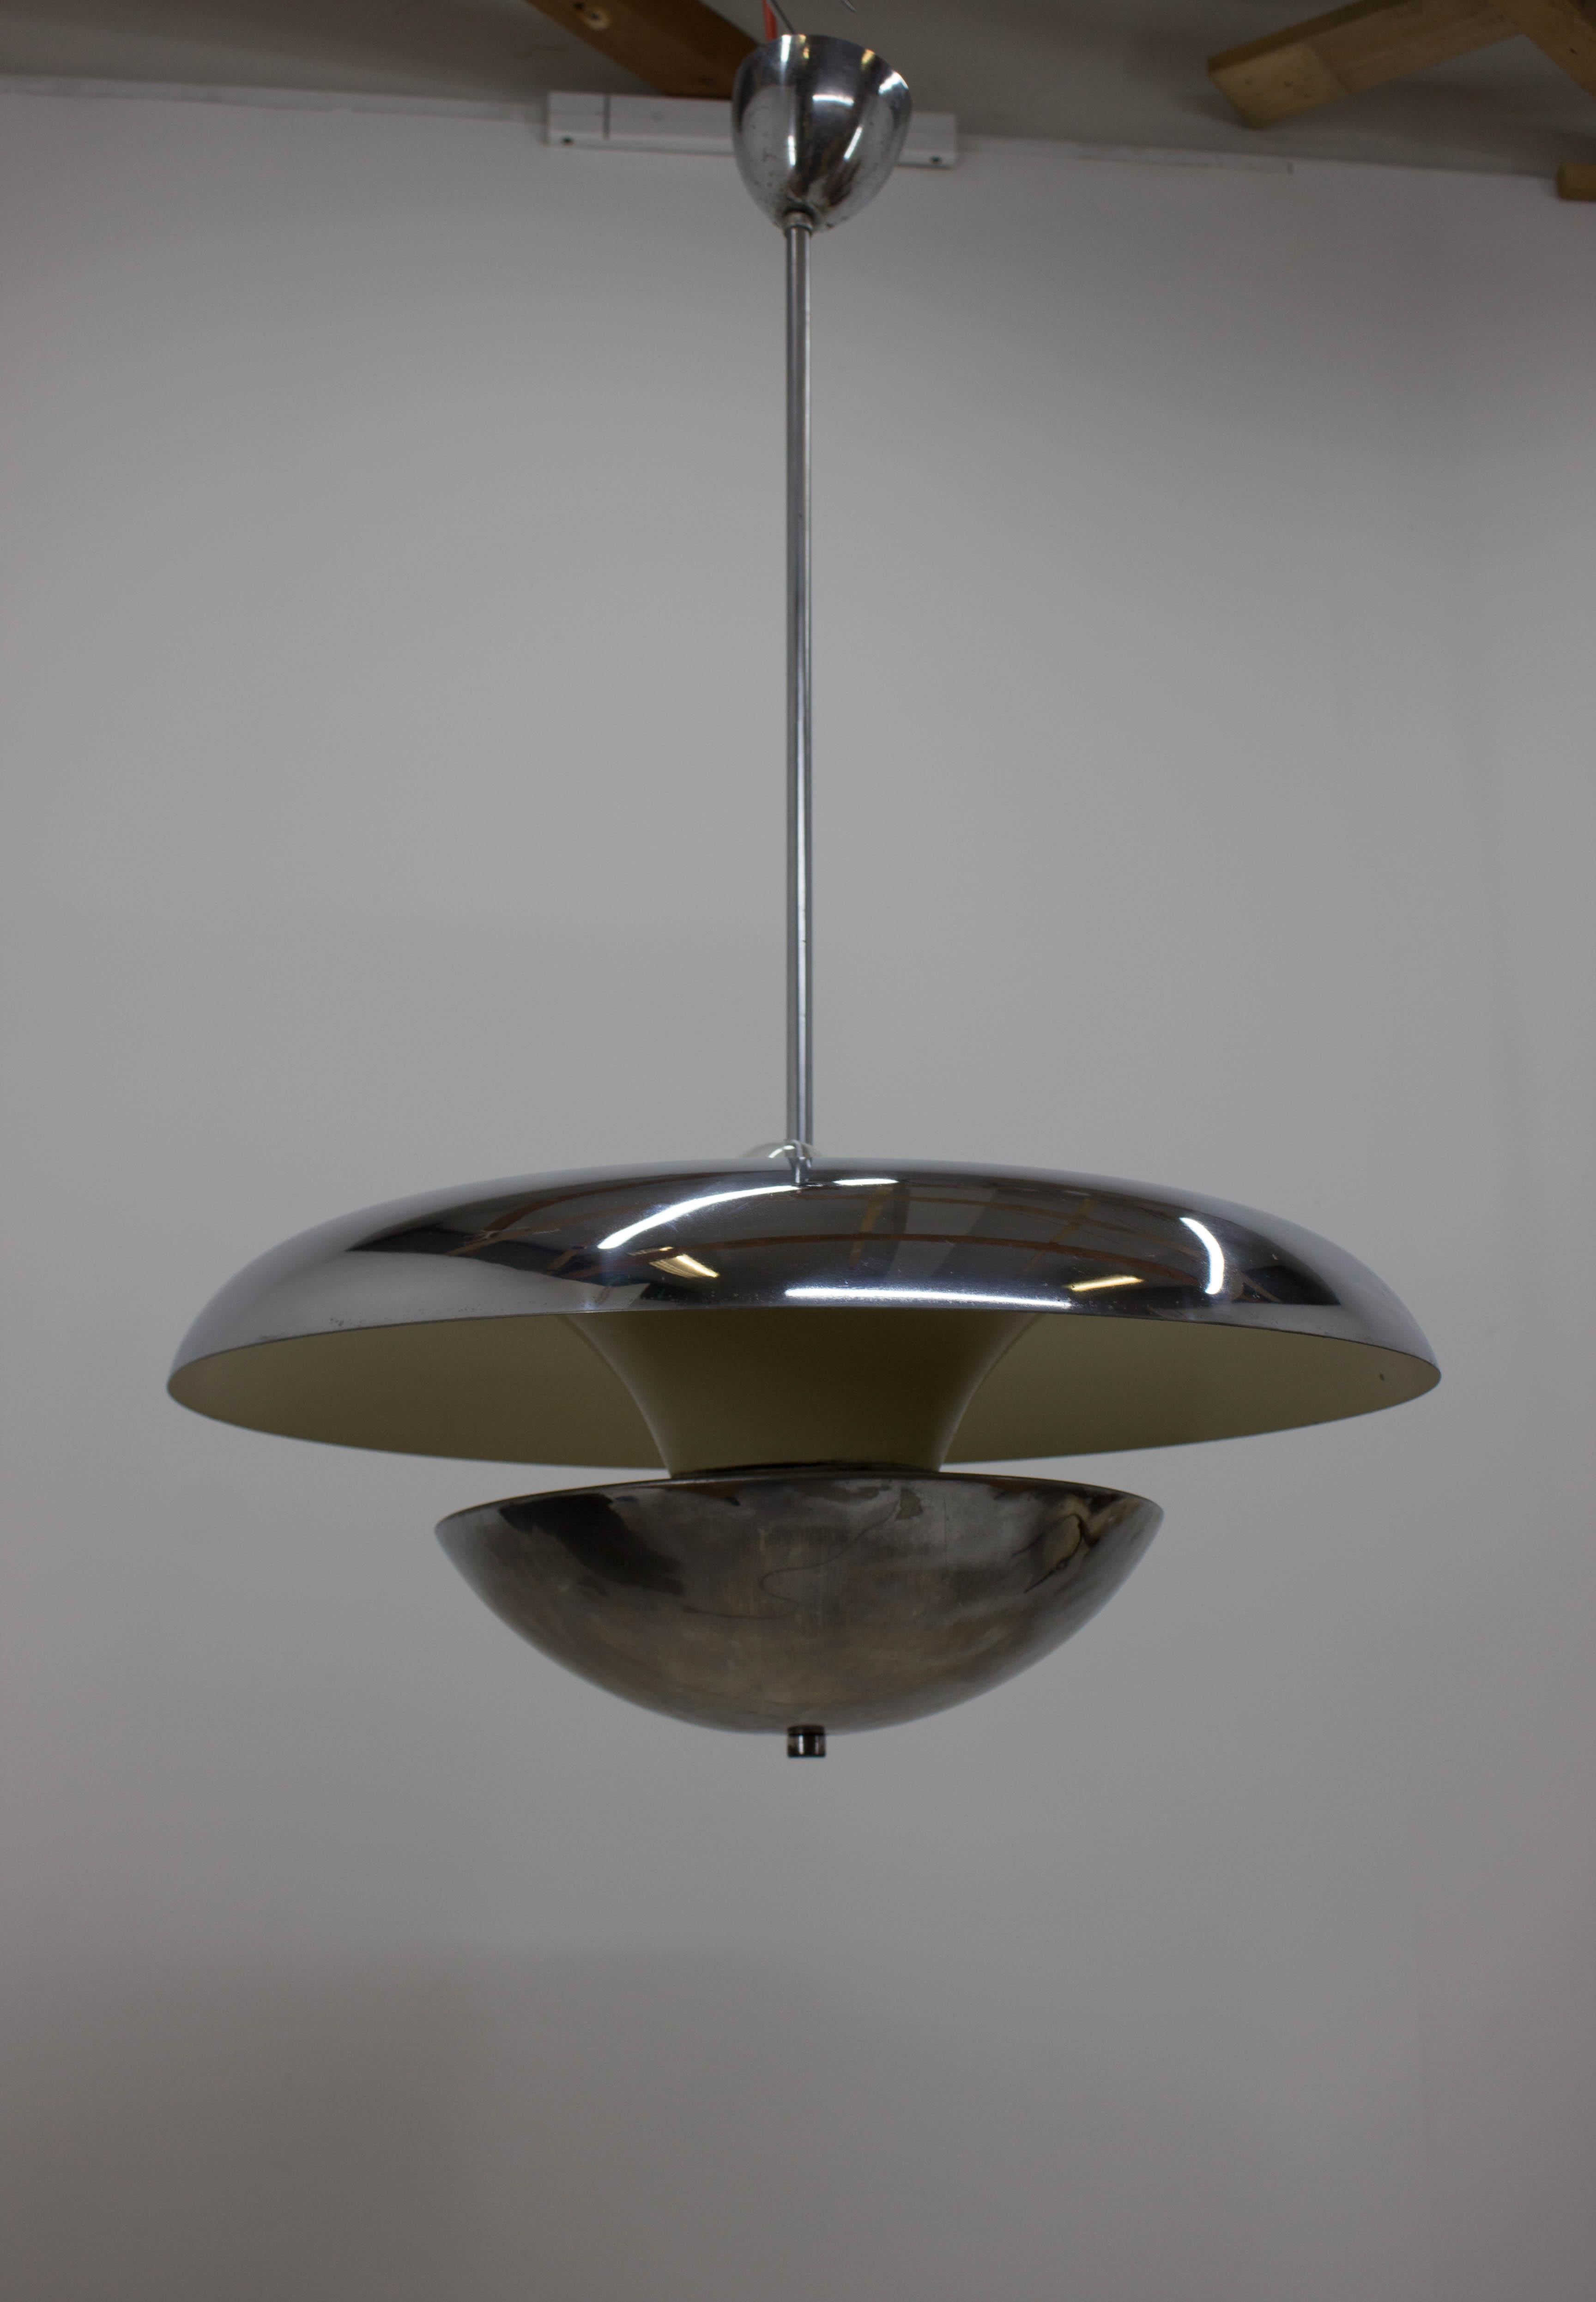 Big Bauhaus chandelier designed by Frantisek Anyz in 1930s for Napako. Chrome-plated. Upper and lower bulbs could be switched separately to produce different kinds of lighting. Very elegant! Very rare!
5 x 40W, E27 bulbs.